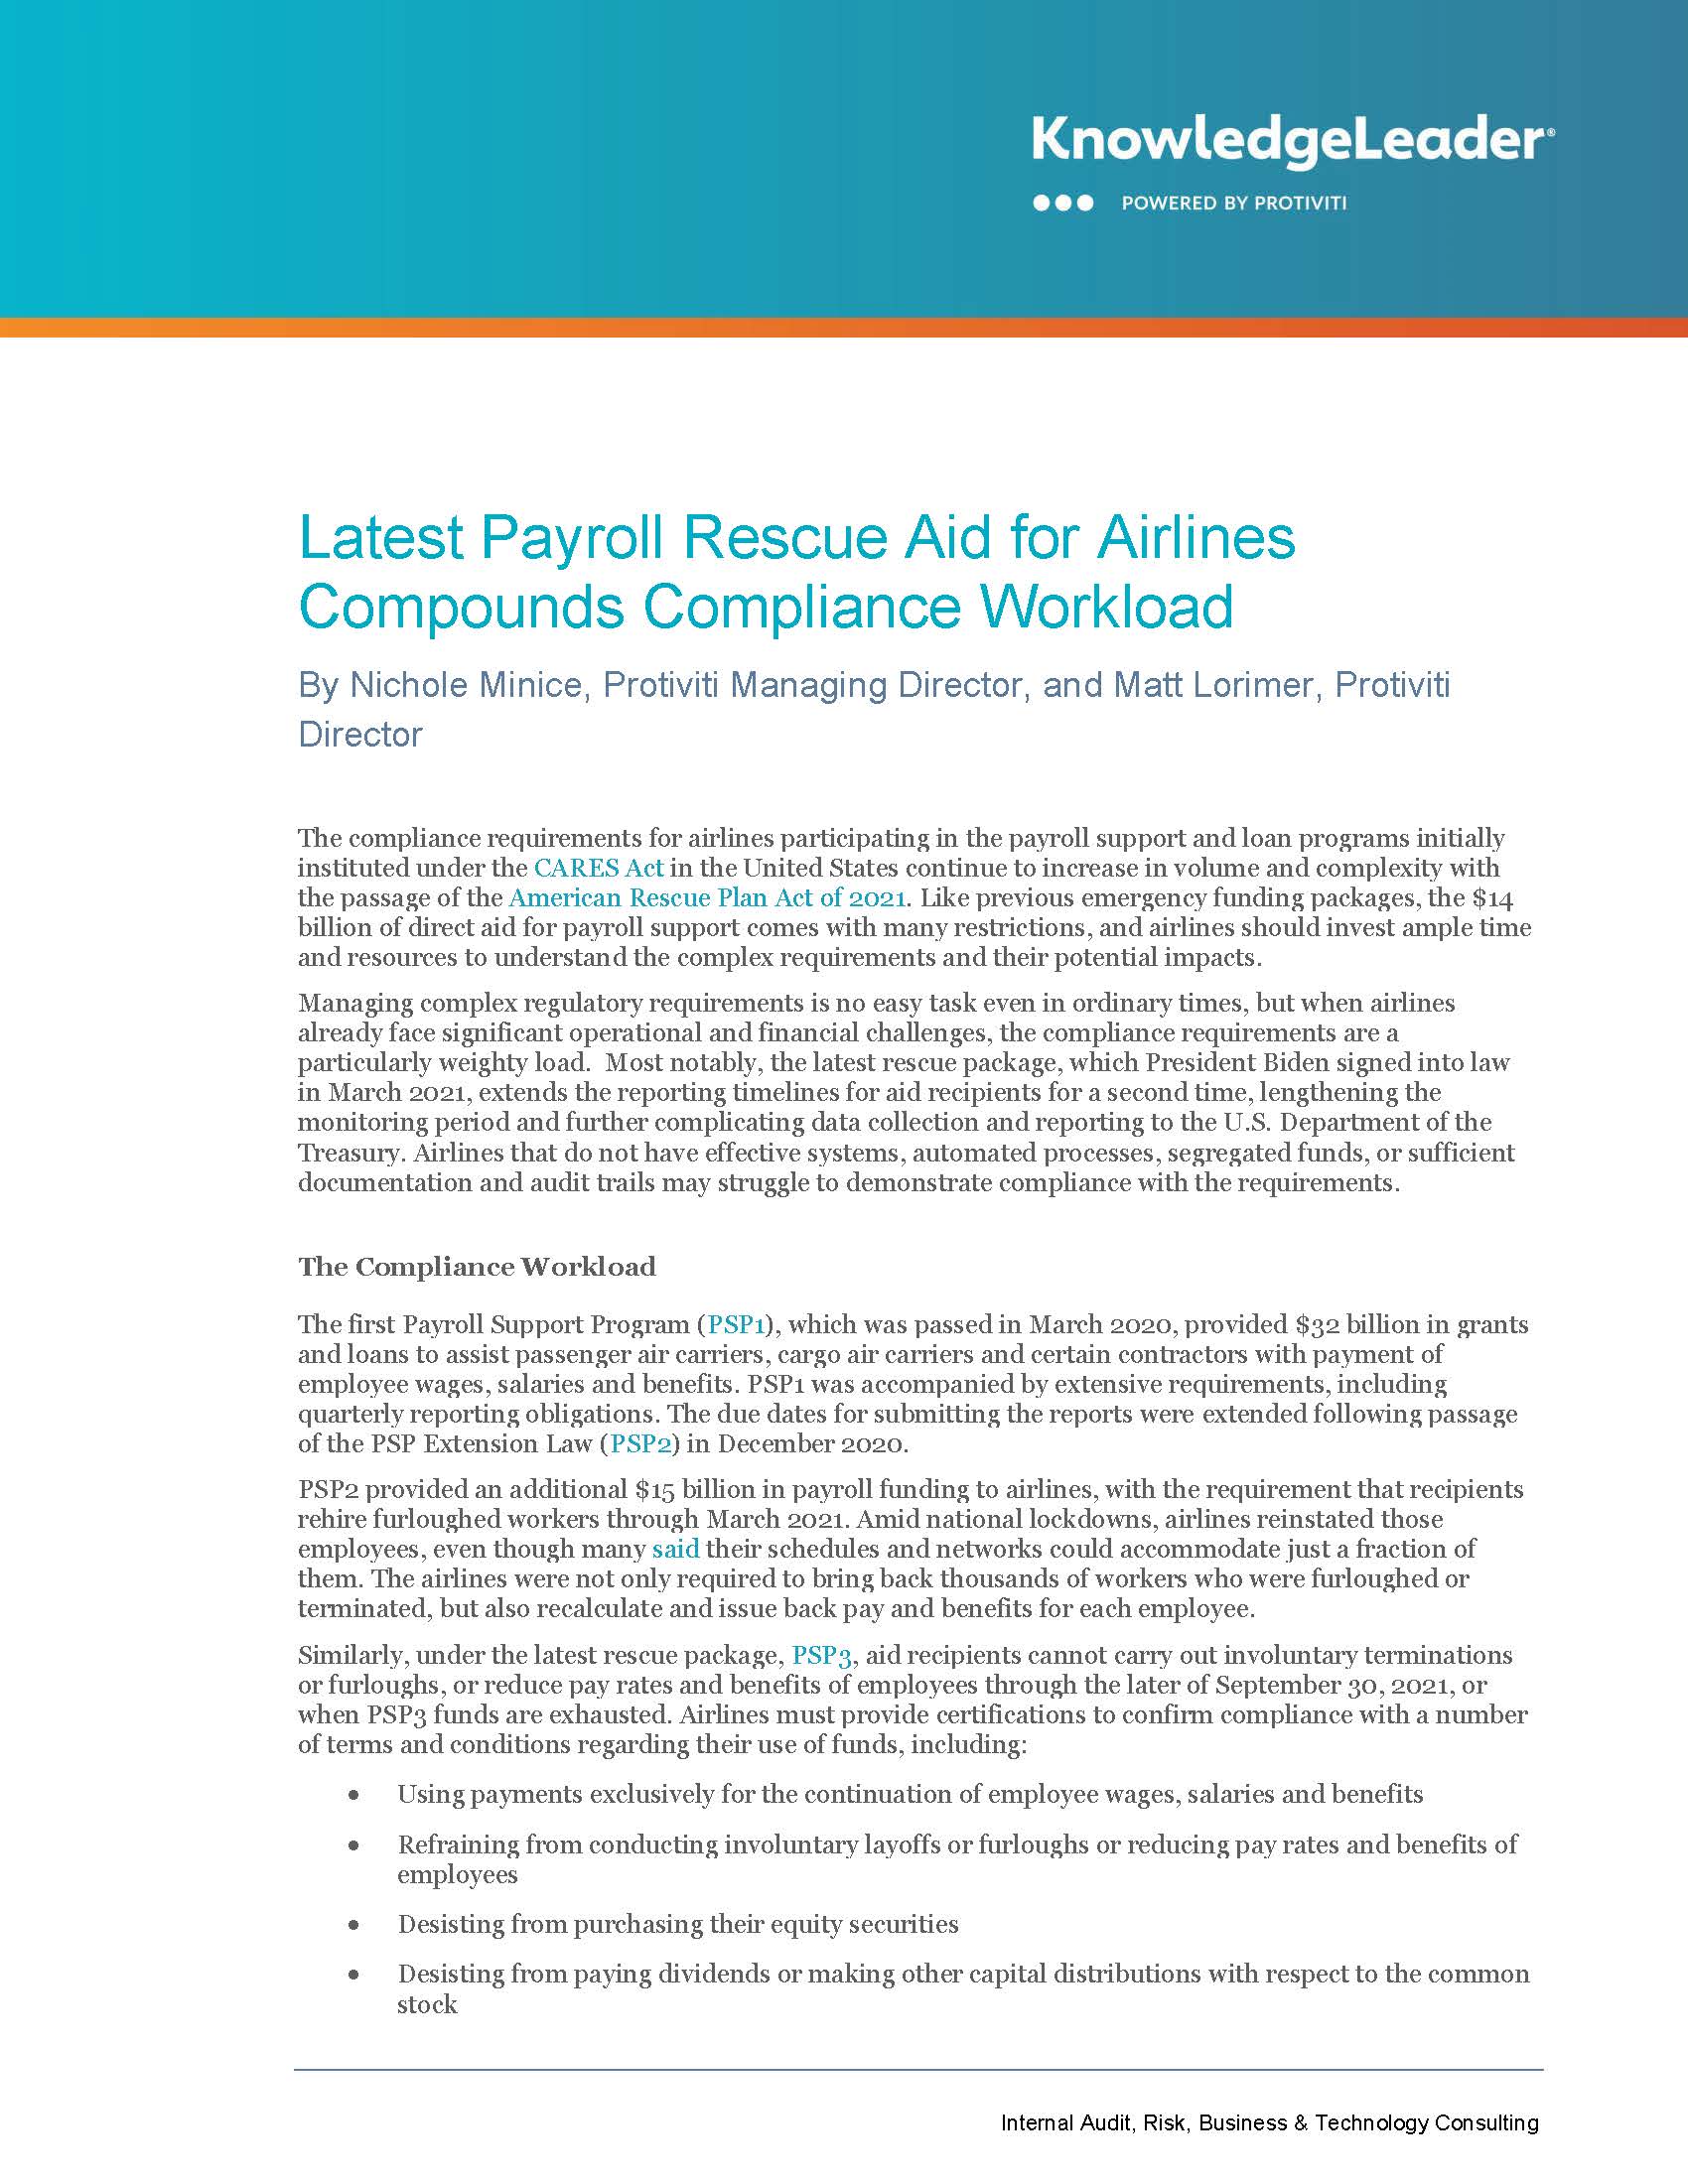 Screenshot of the first page of Latest Payroll Rescue Aid for Airlines Compounds Compliance Workload